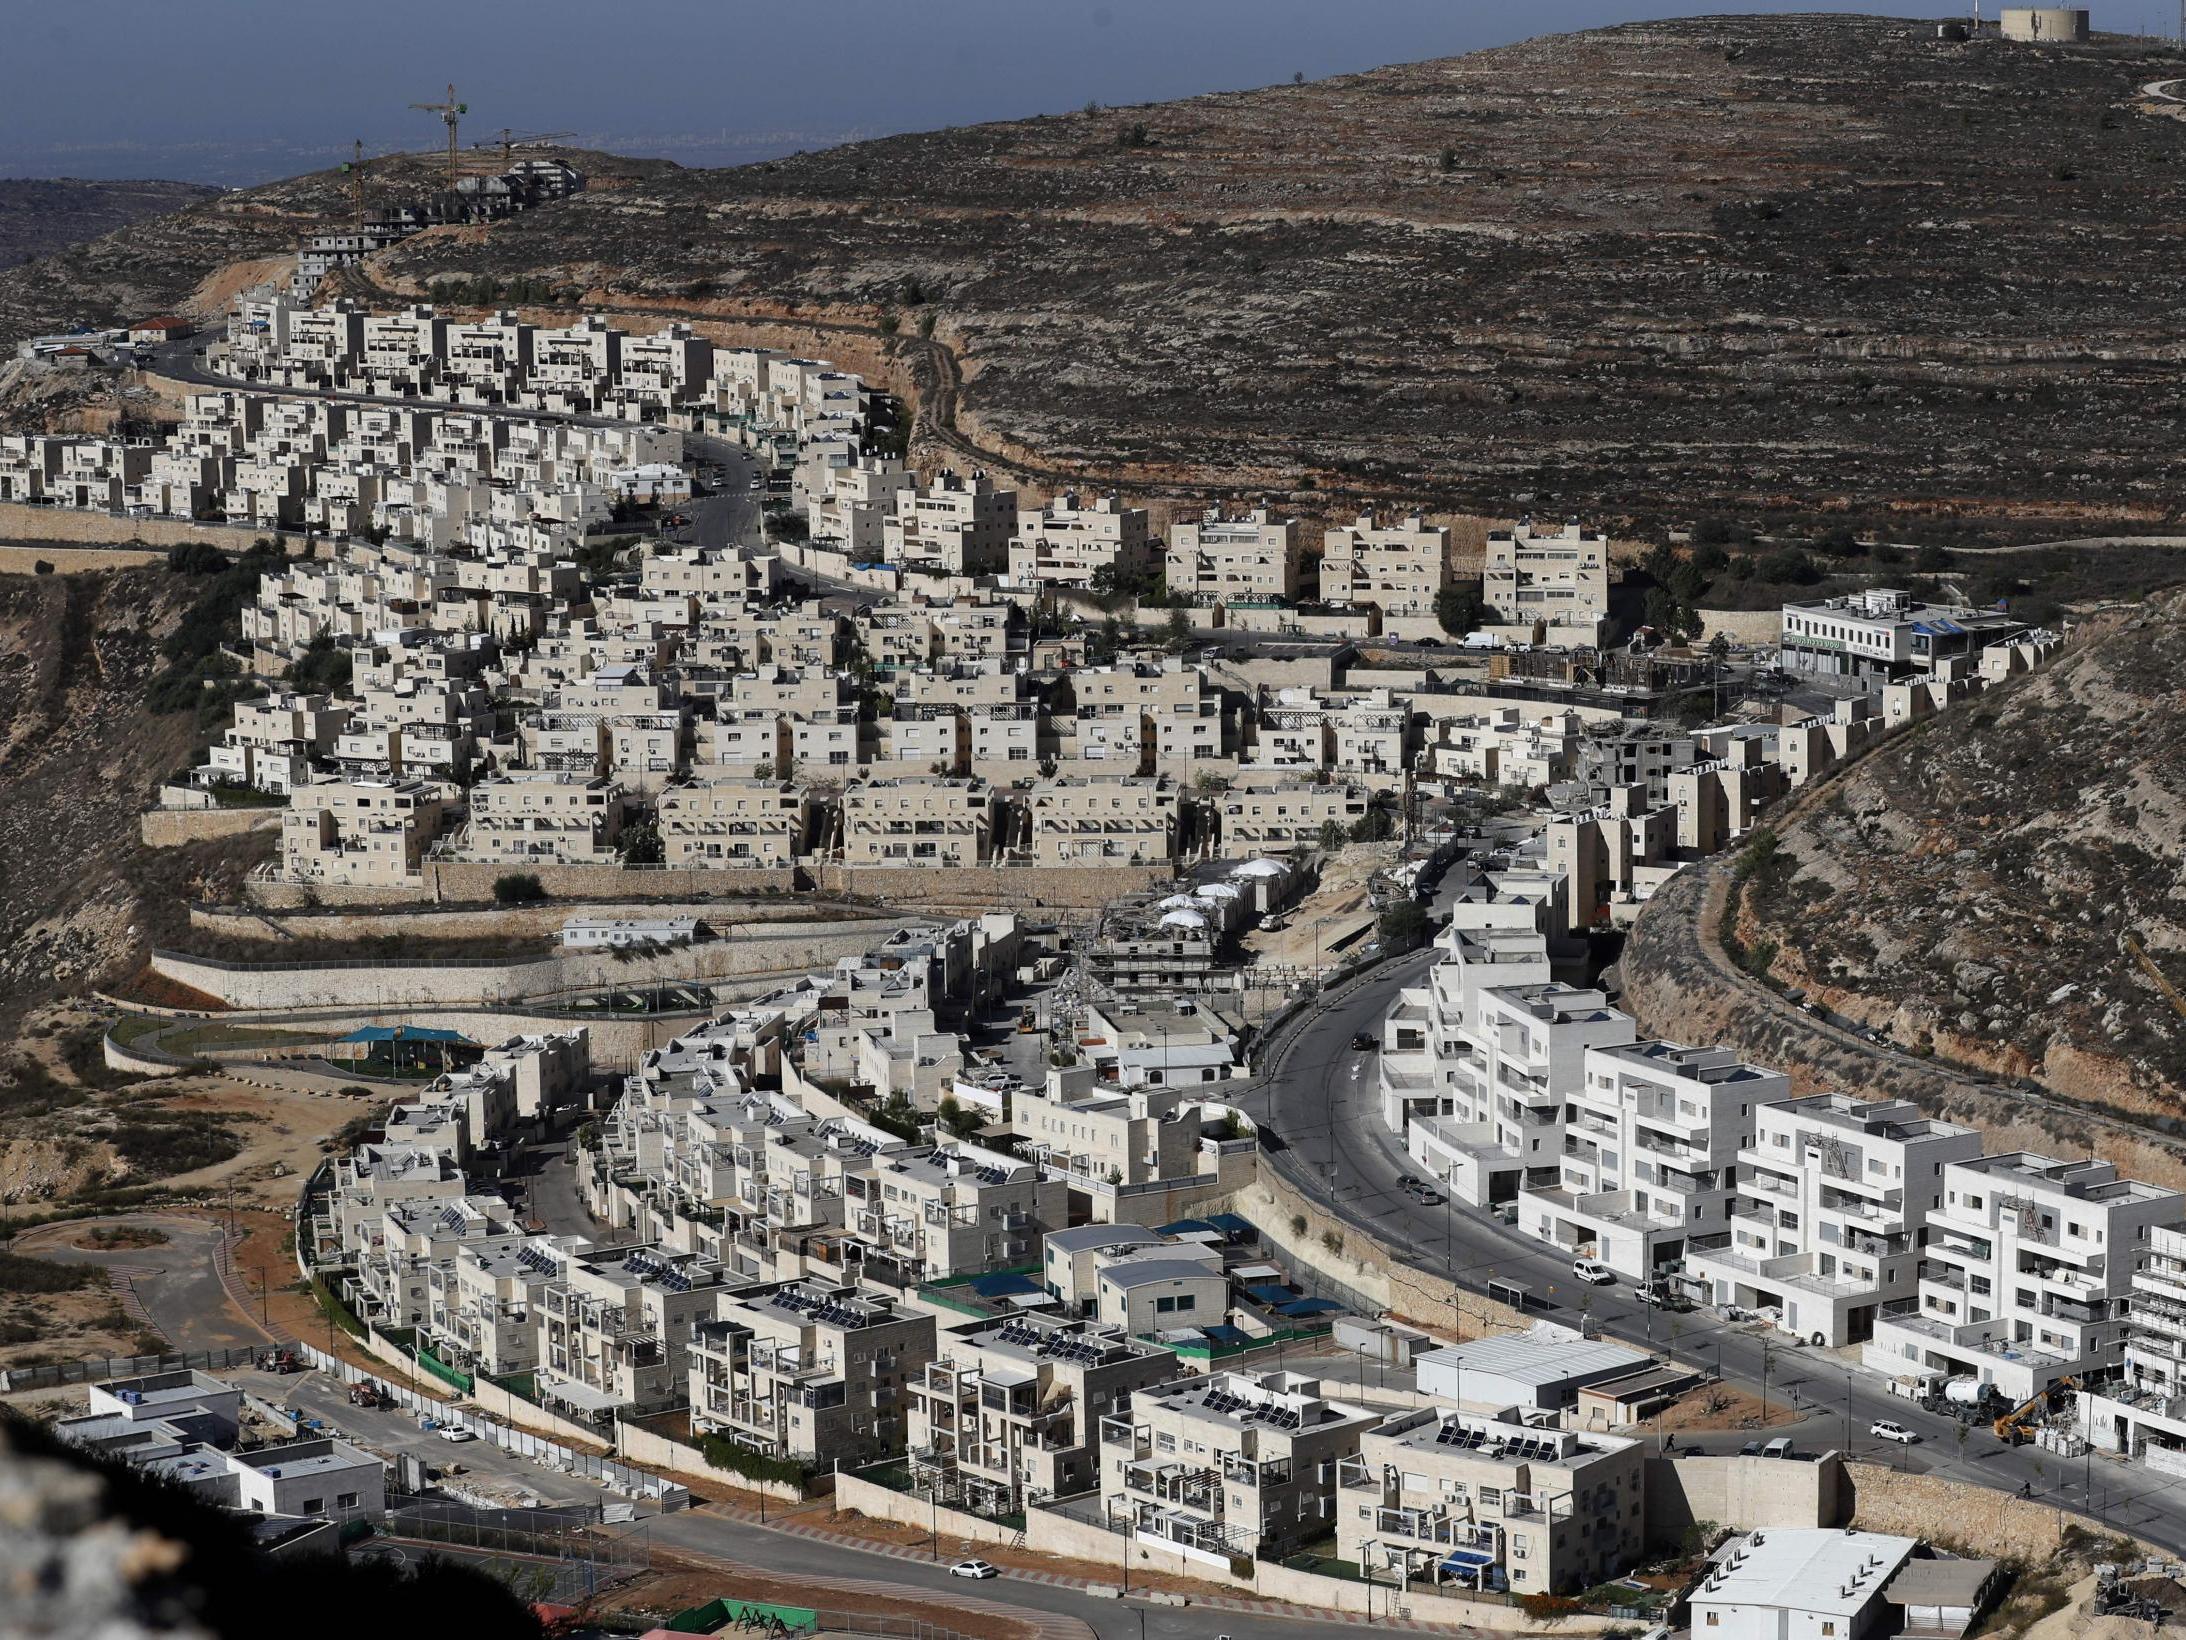 Israel's annexation plan for the West Bank: All you need to know